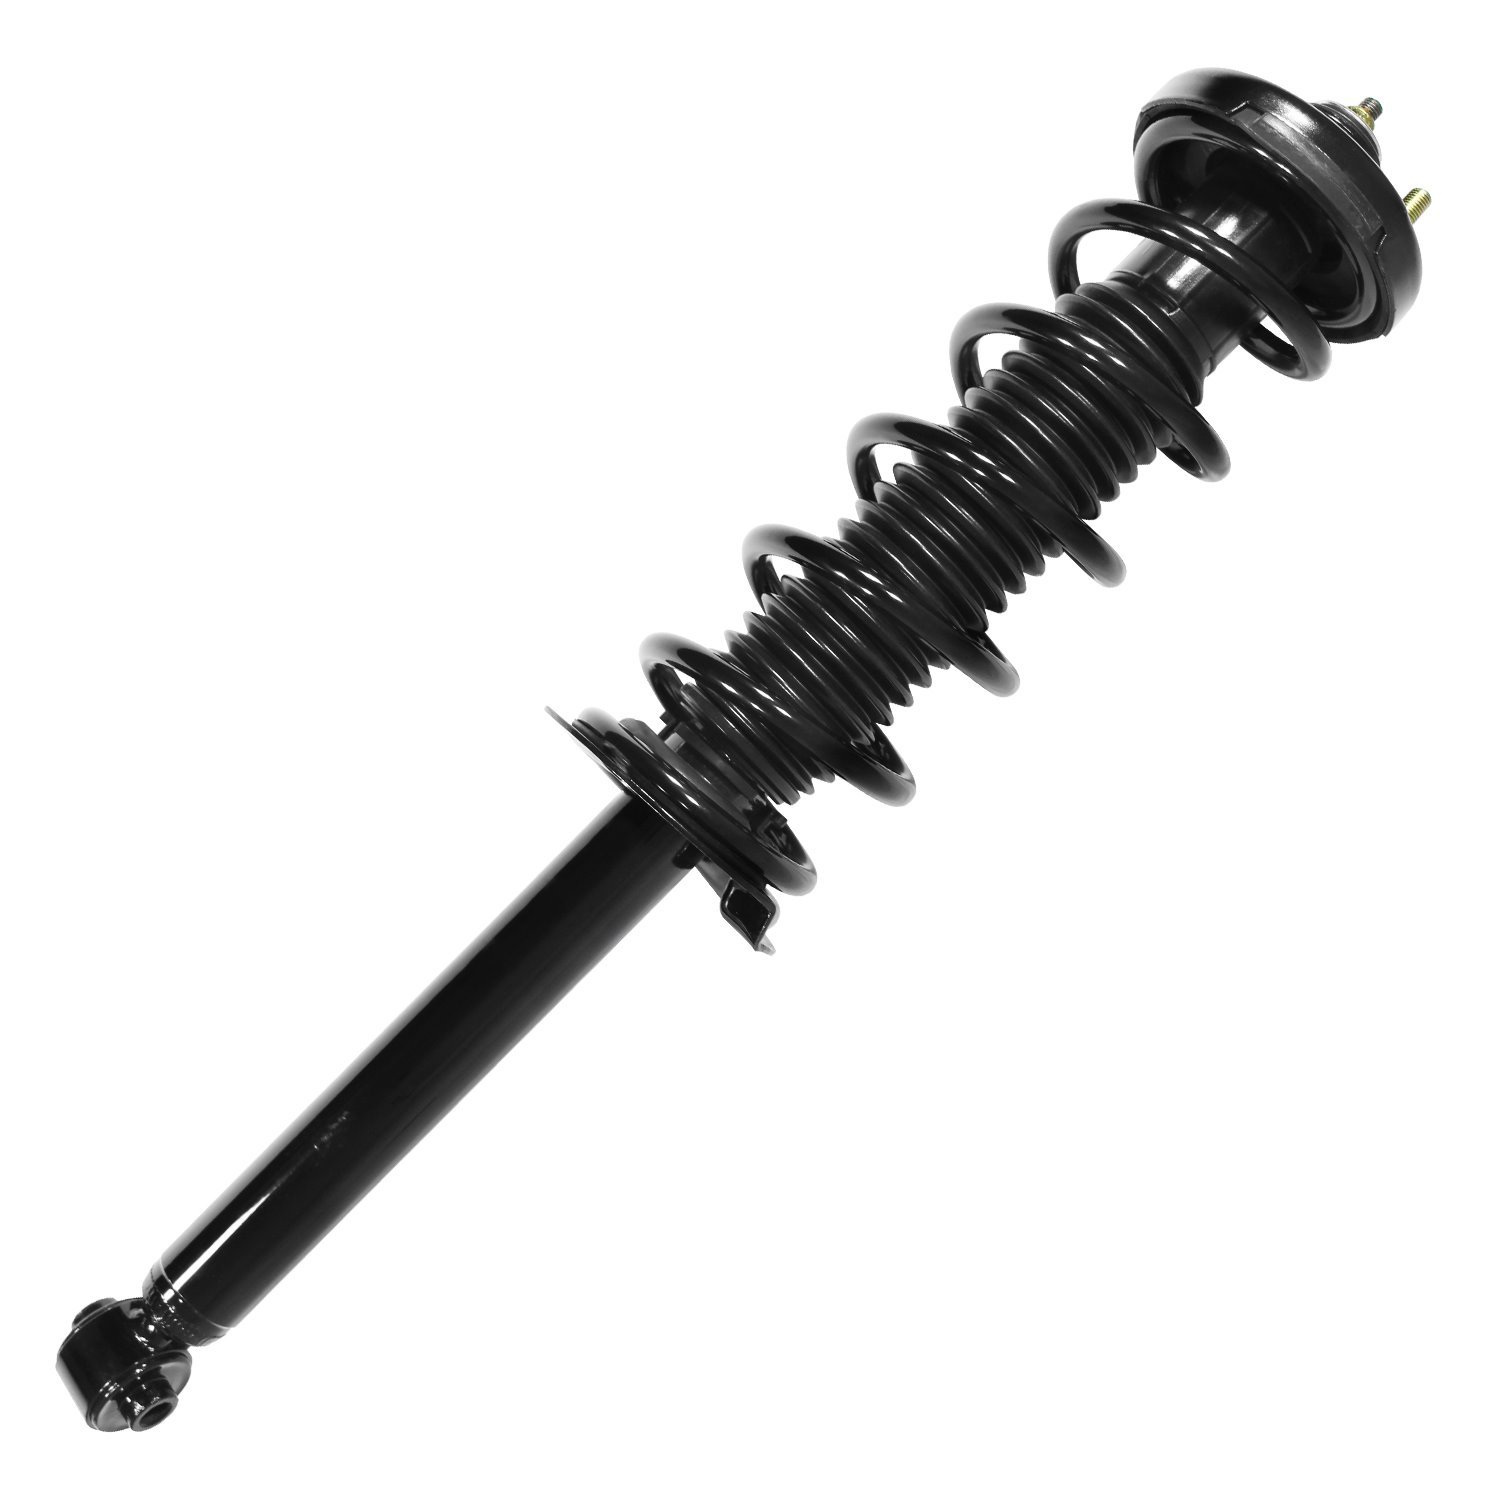 15050 Suspension Strut & Coil Spring Assembly Fits Select Acura TL, Honda Accord